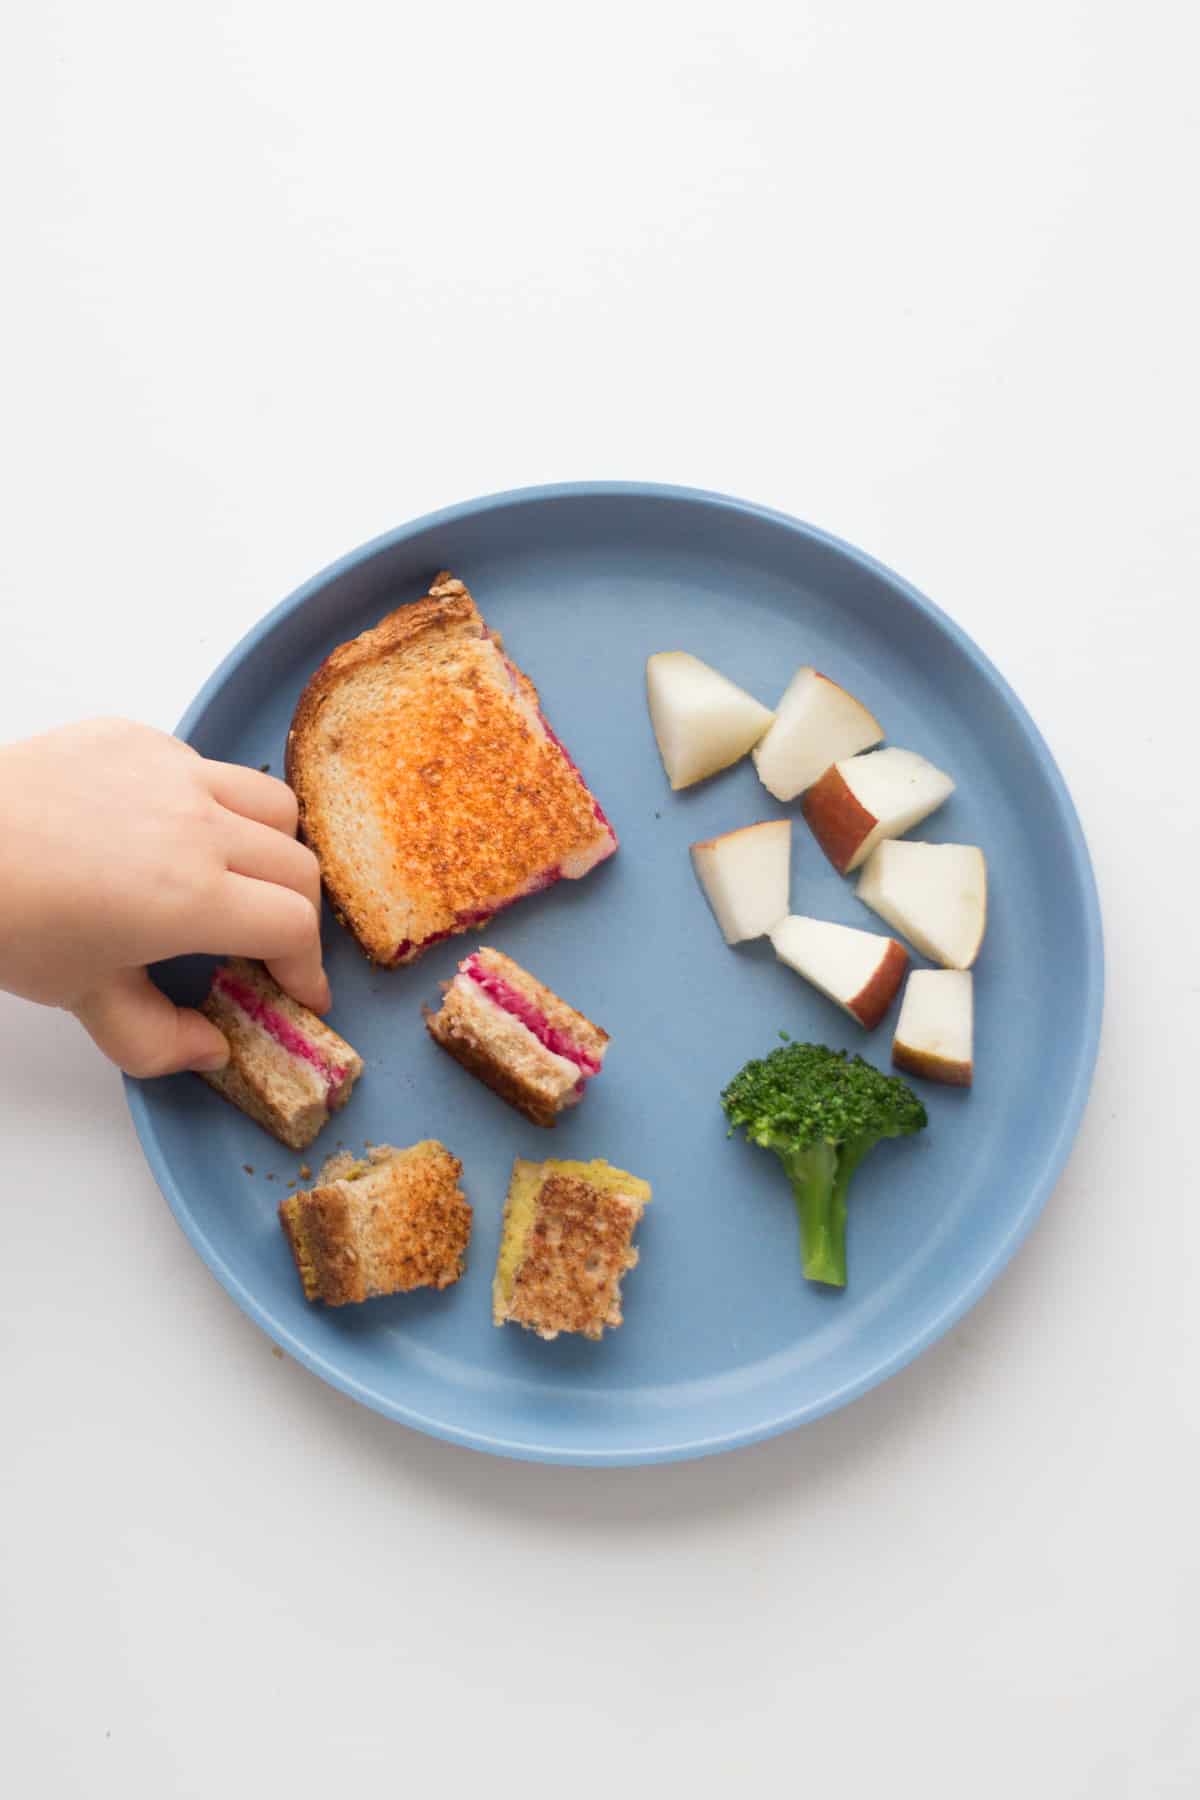 grilled cheese cut into bite sized pieces and small rectangle with diced apples and one broccoli floret.